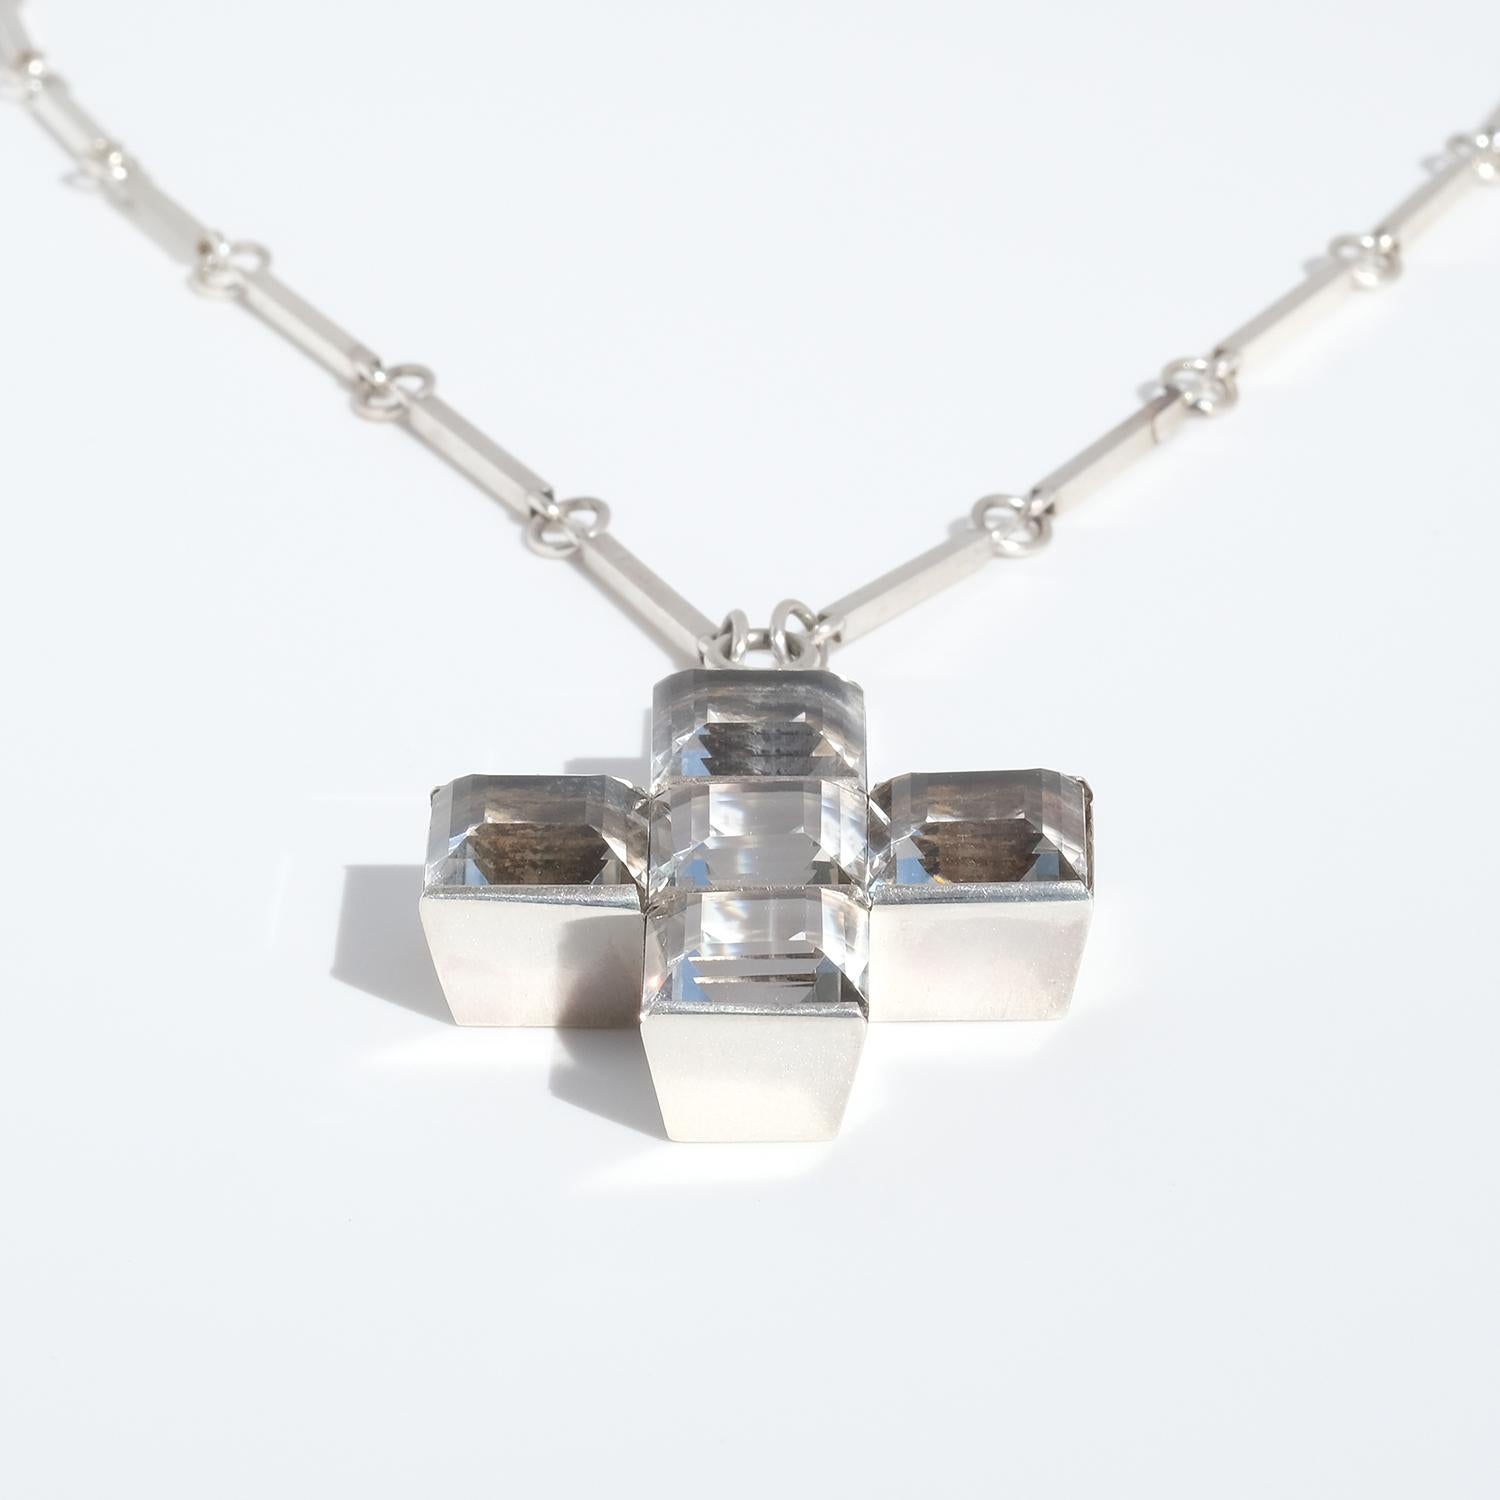 Silver Necklace with Rock Crystal Cross, Made by Wiwen Nilsson in 1939, Sweden For Sale 1